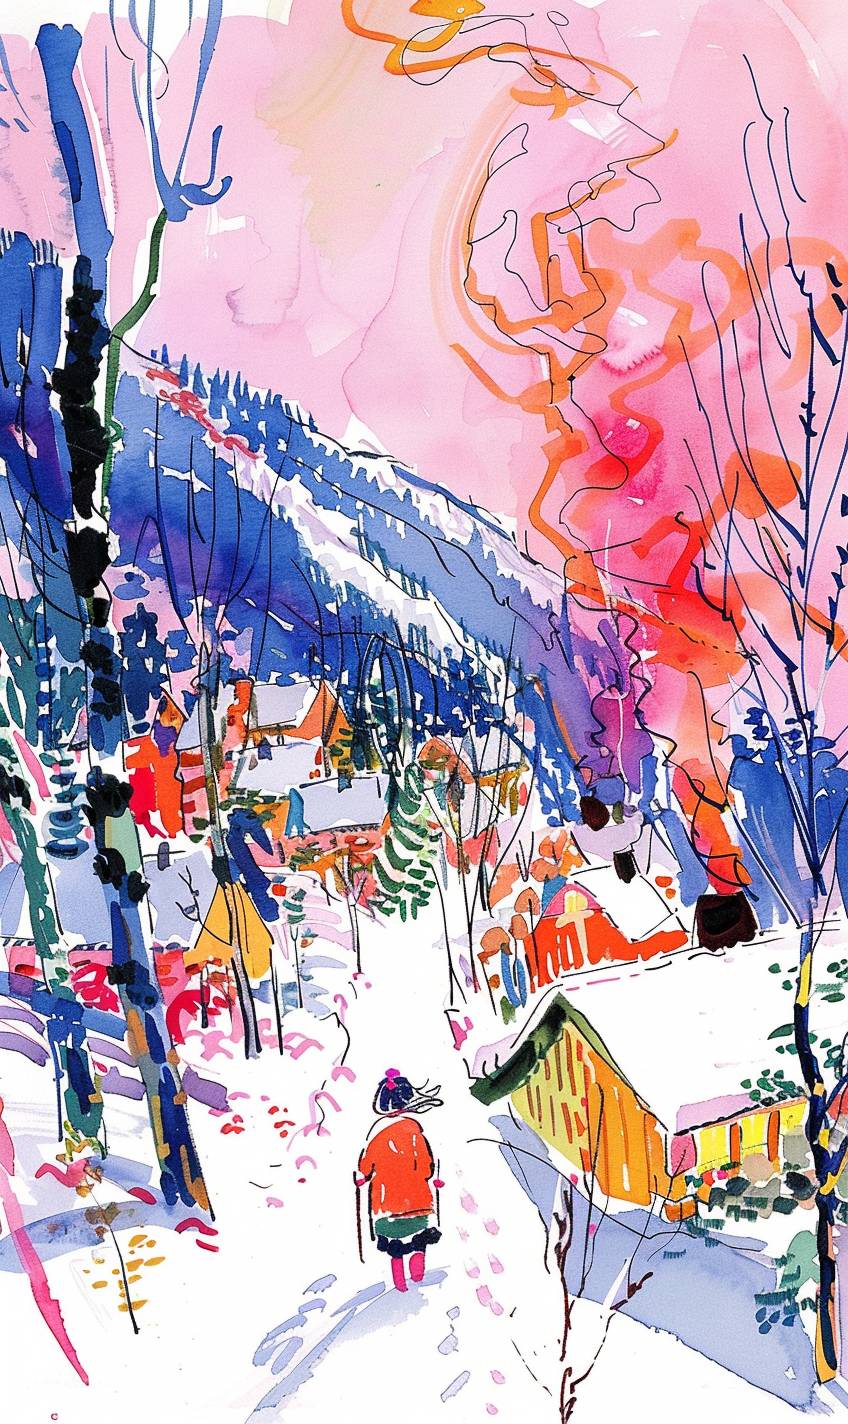 A young girl in a snow-covered mountain village during winter, cozy wooden houses, smoke rising from chimneys, with soft twilight casting a magical glow